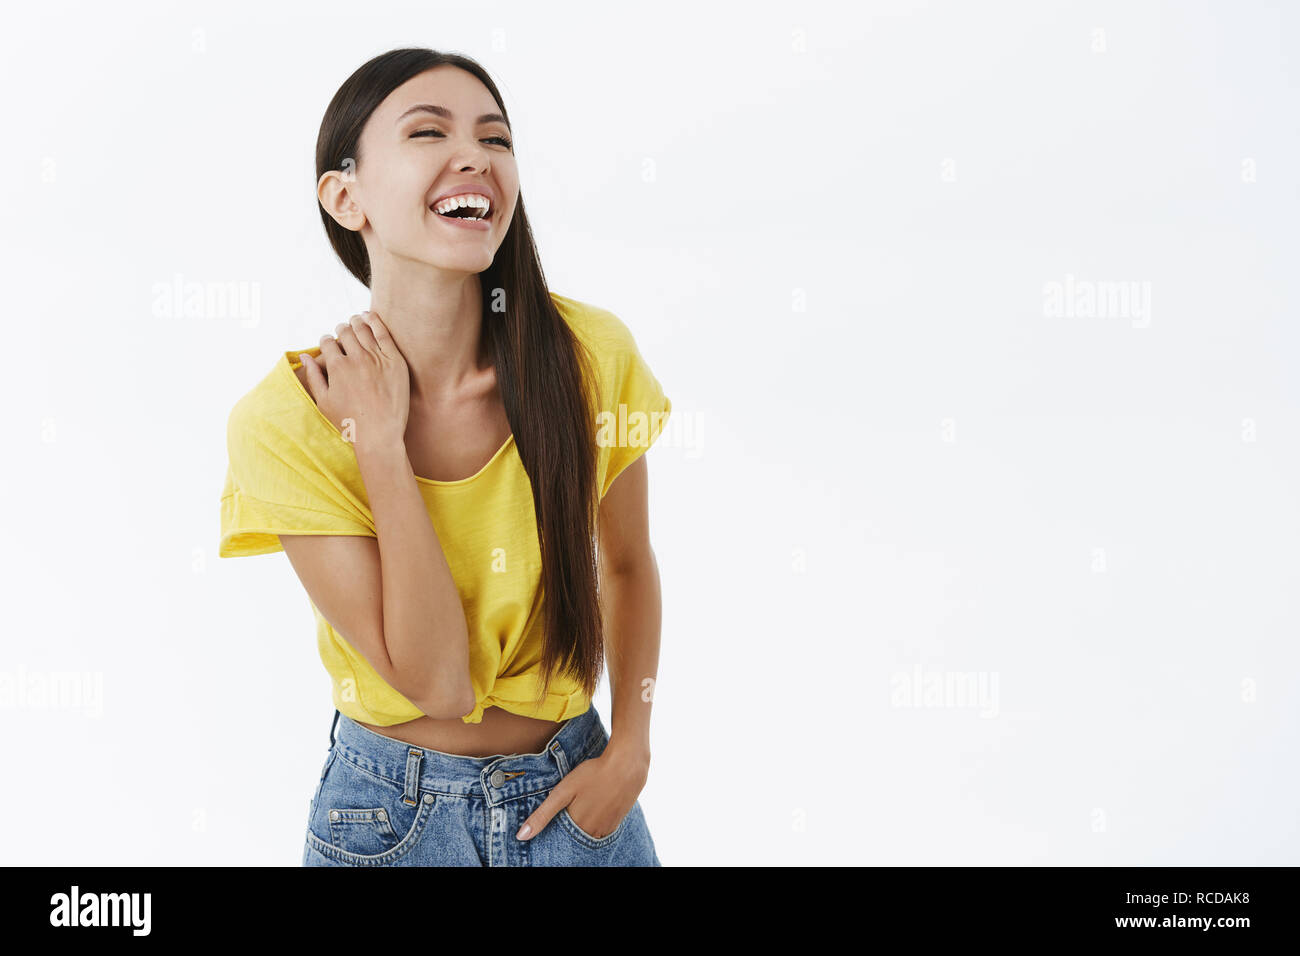 Carefree enthusiastic asian woma having fun laughing out loud over funny joke having amusing time looking right touching neck chuckling being entertained in awesome company posing in stylish outfit Stock Photo